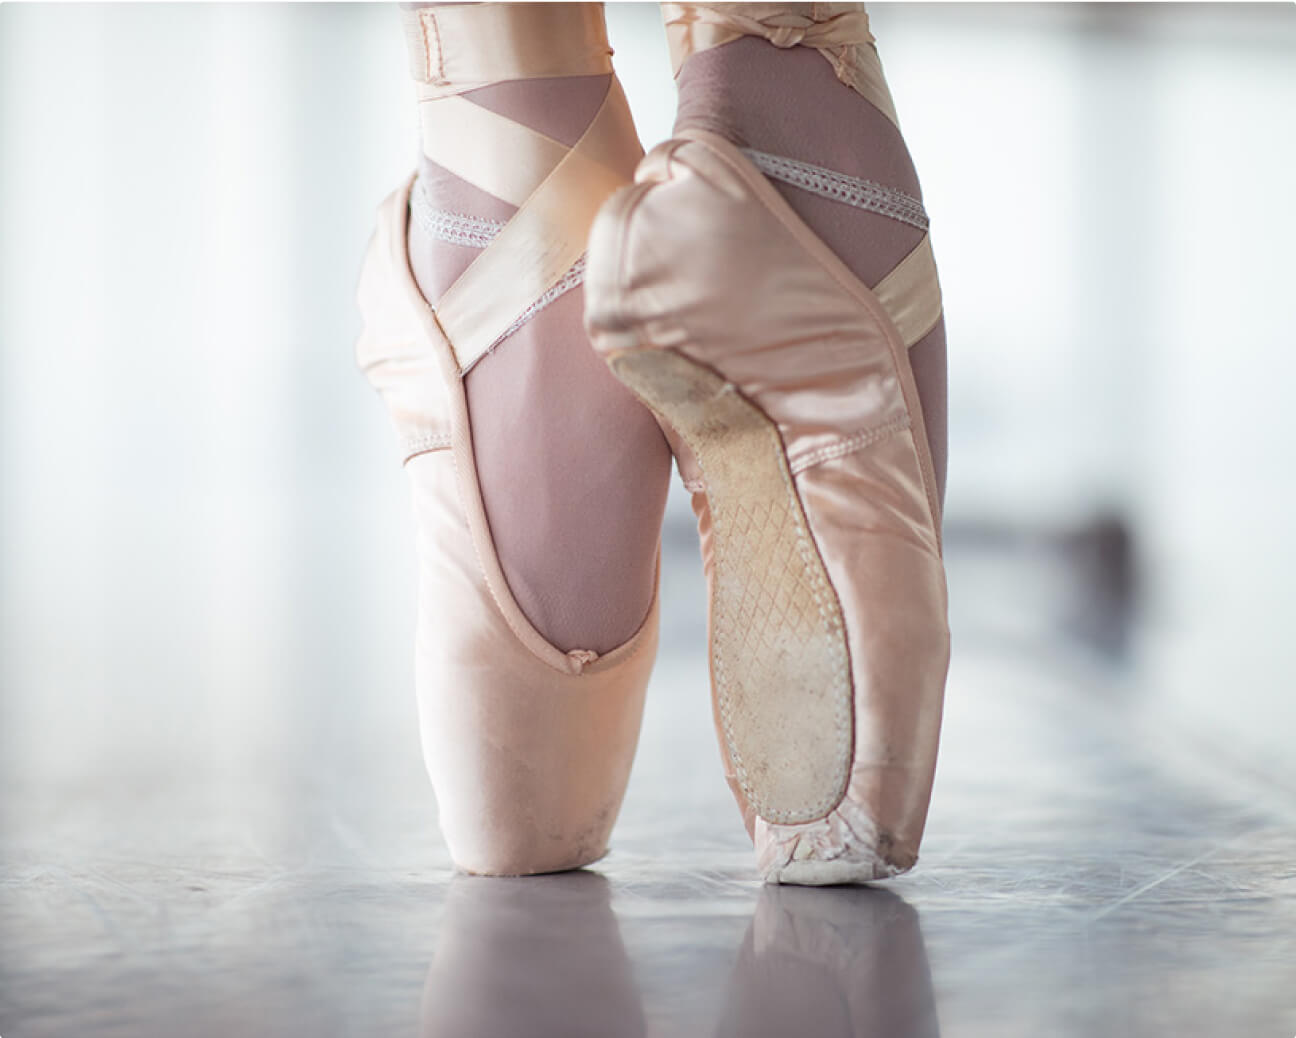 A closeup of a ballerina's feet in light pink shoes, up on toes.